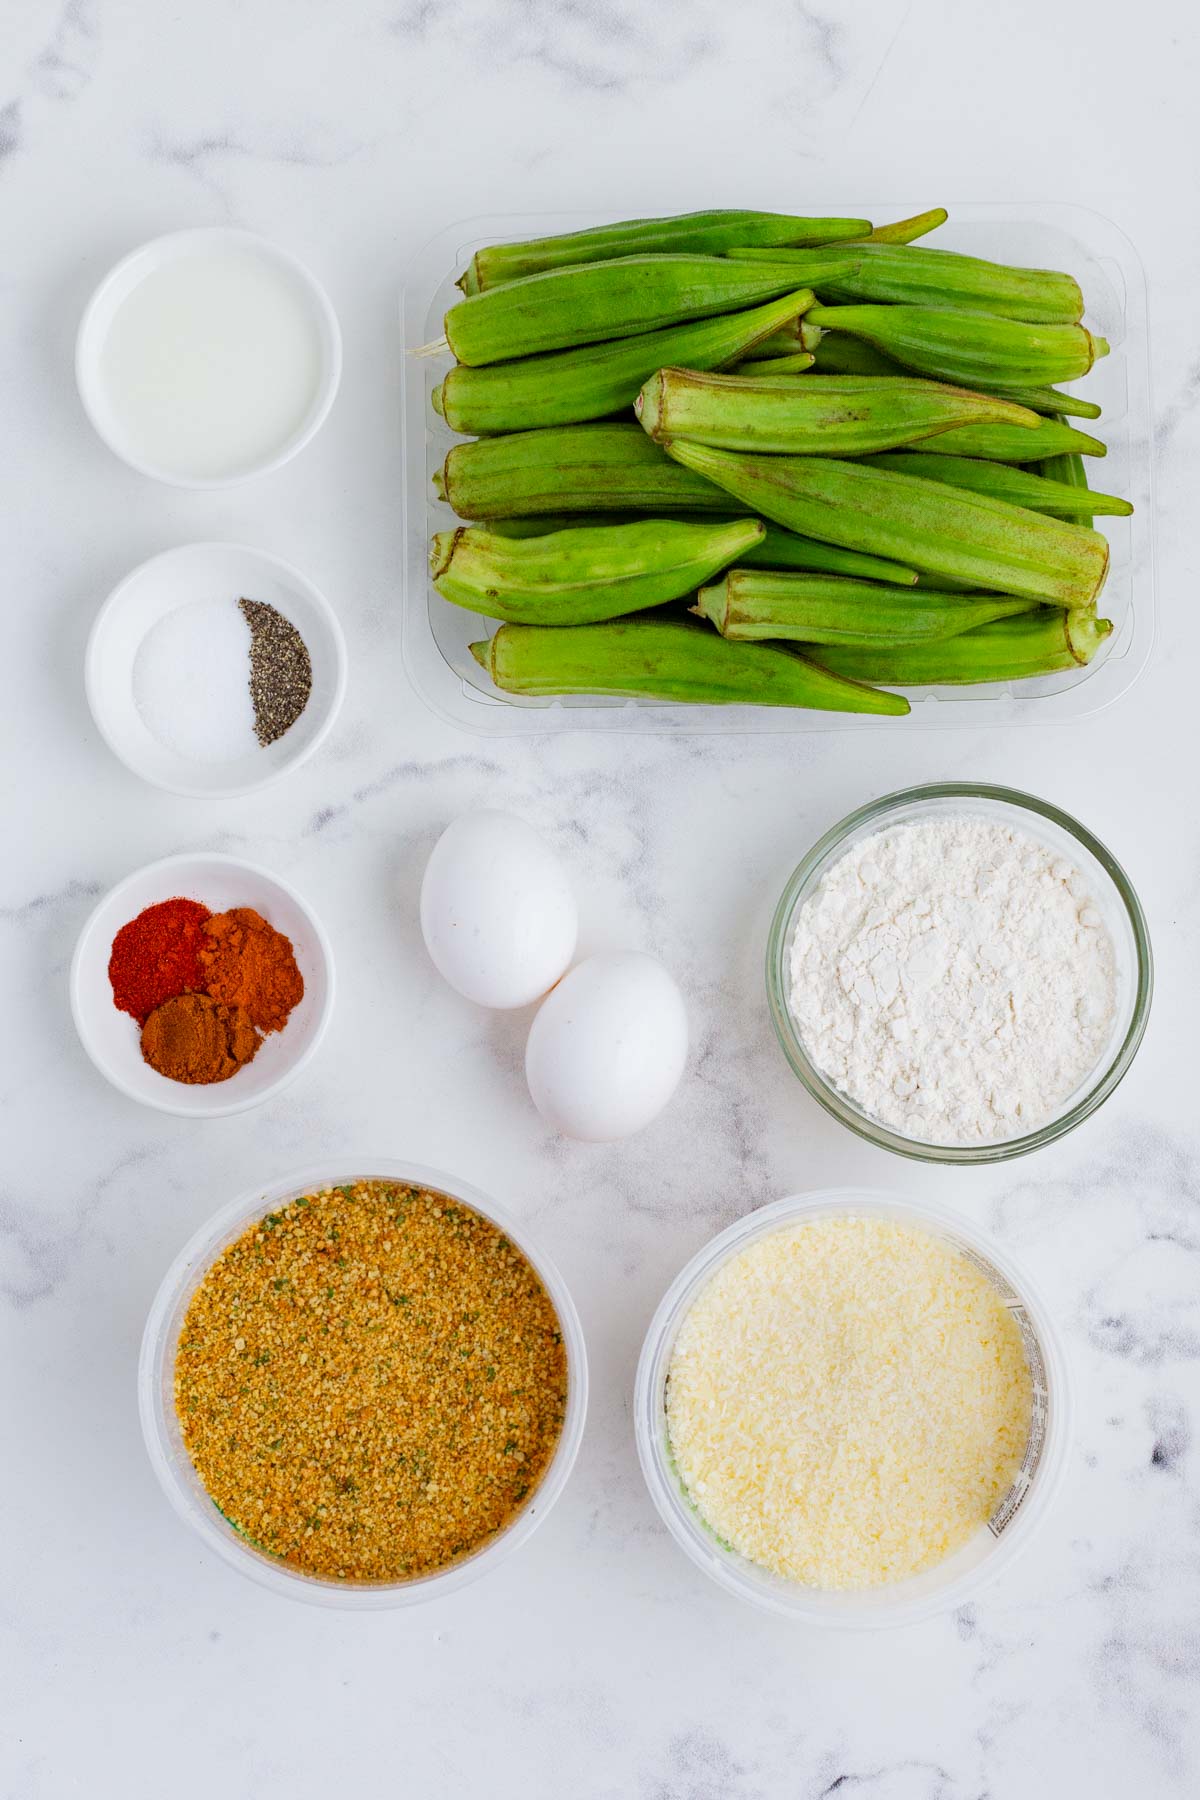 Okra, eggs, flour, seasonings, and breadcrumbs are the ingredients for this dish.